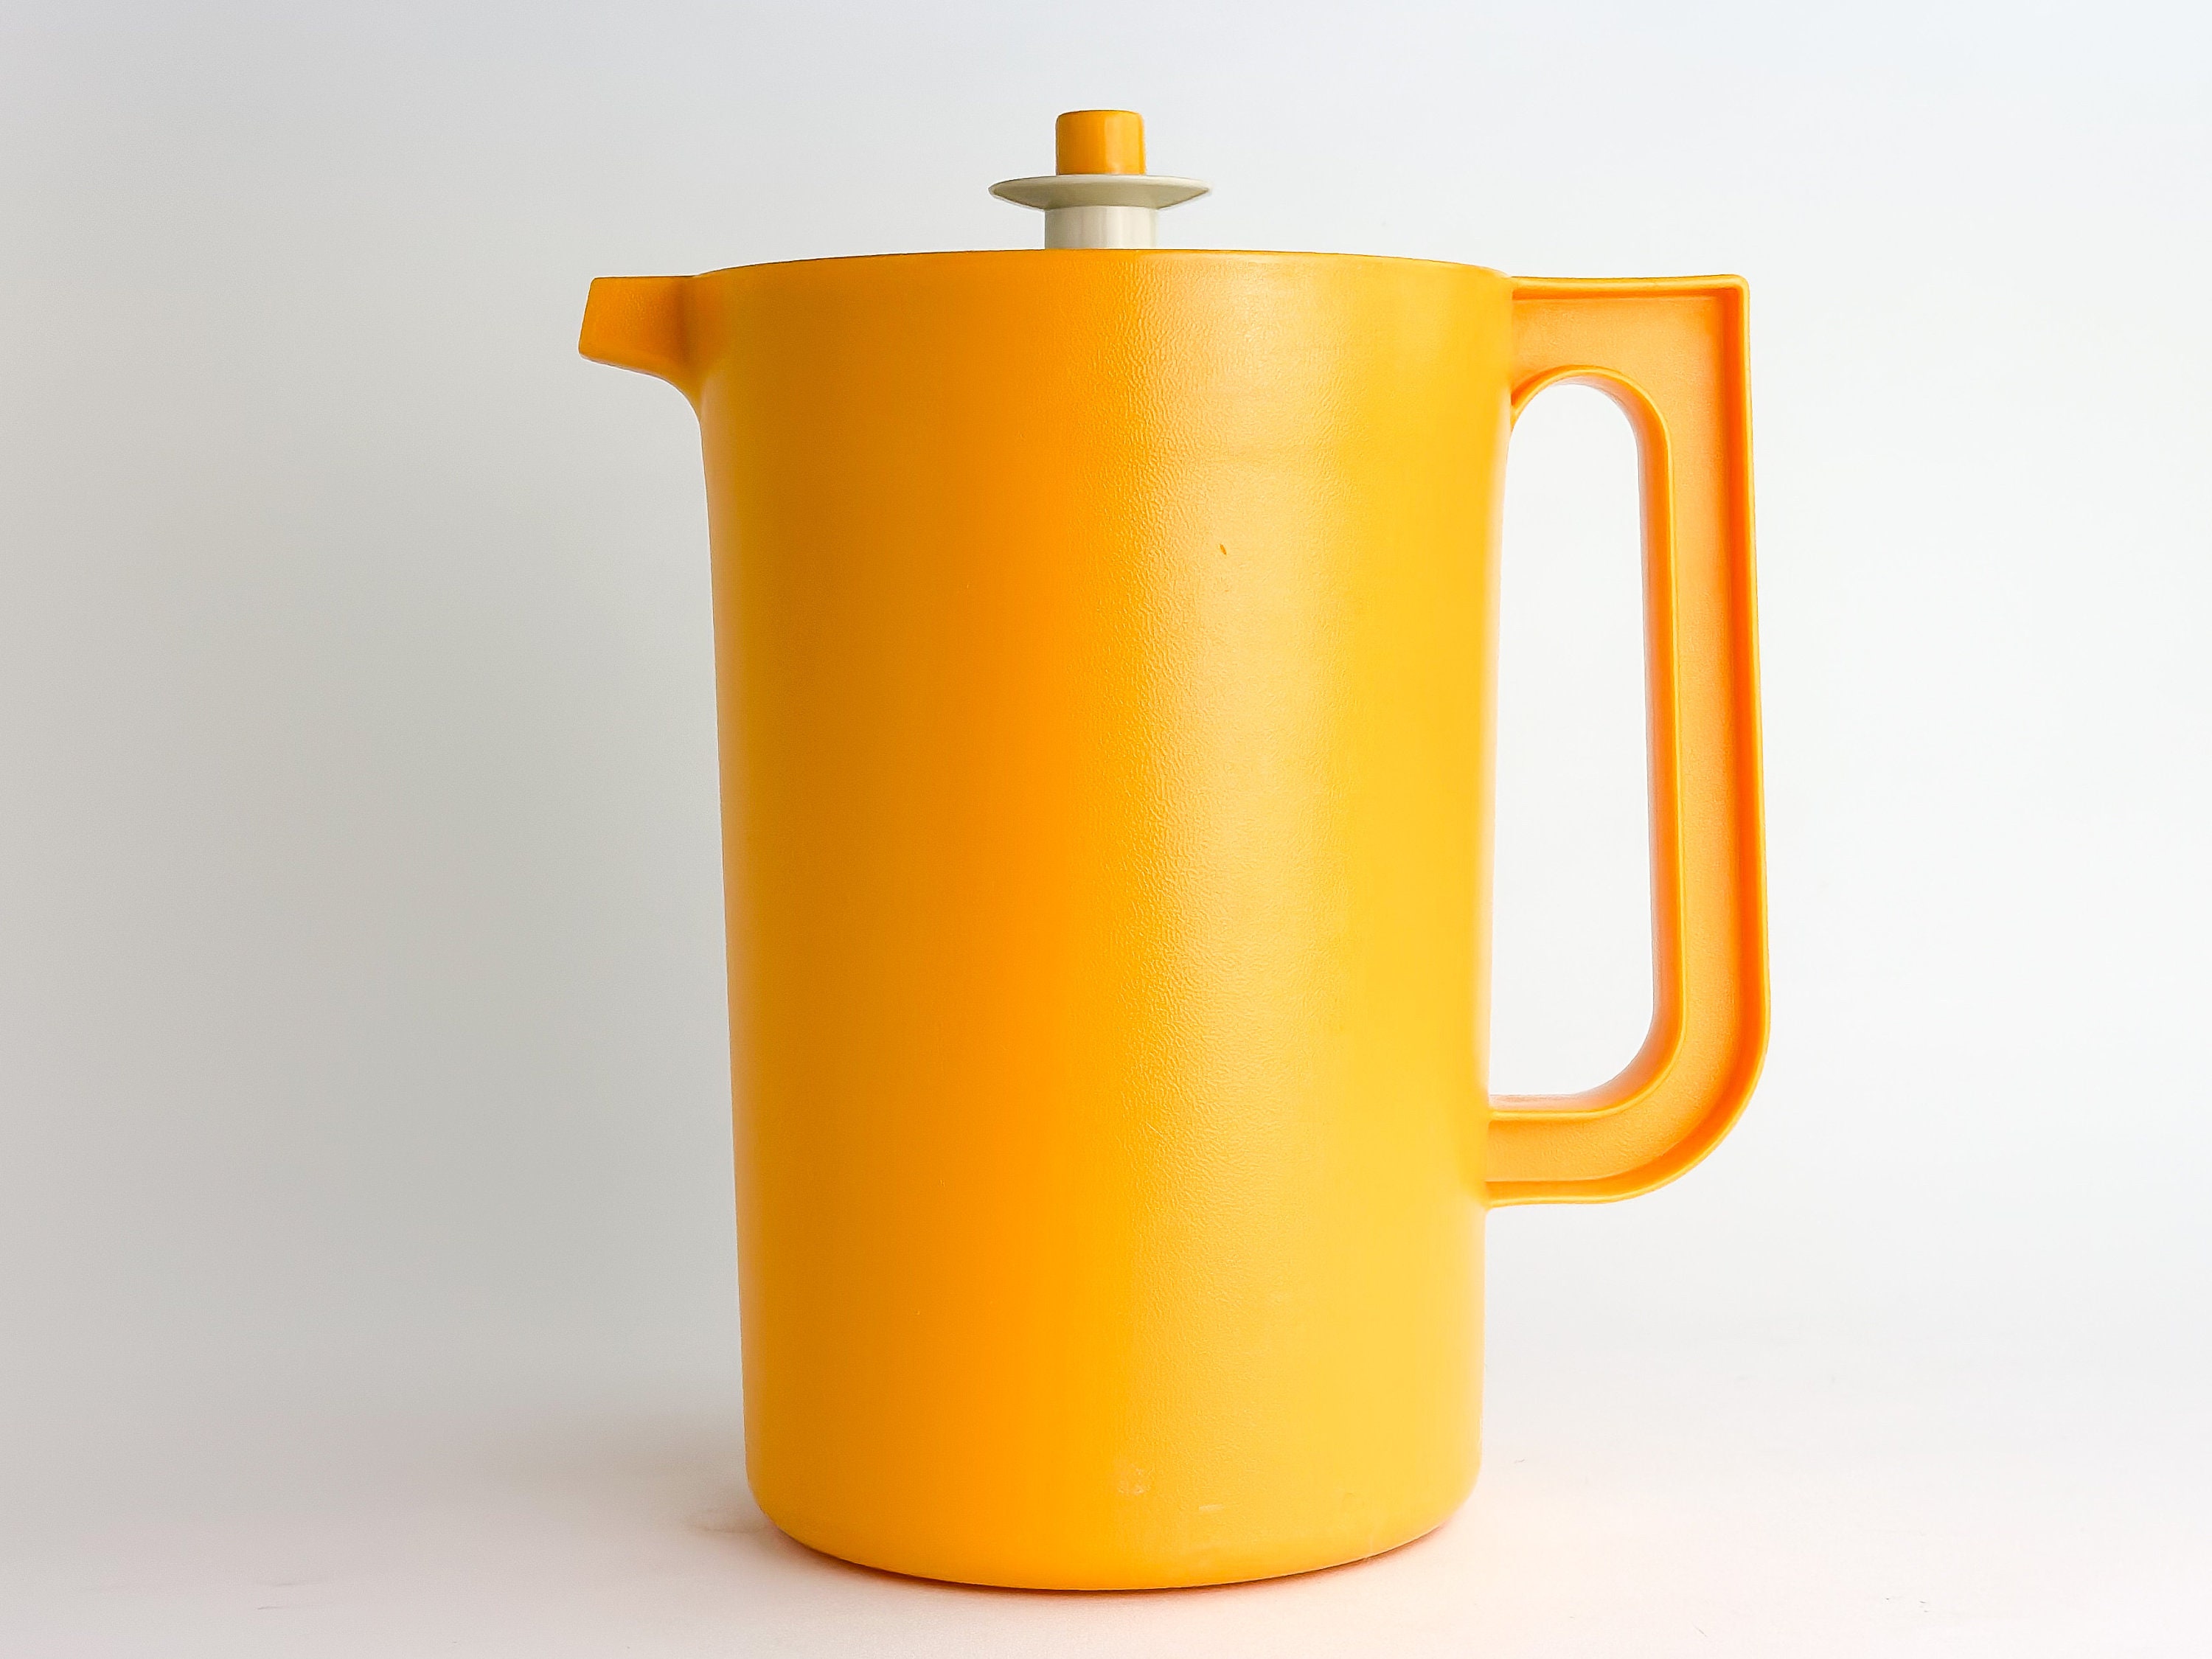 Vintage Tupperware Punch Pitcher W Plunger Lid Bright Tangerine Yellow  Orange Serving Drink Pitcher 64 Ounce 